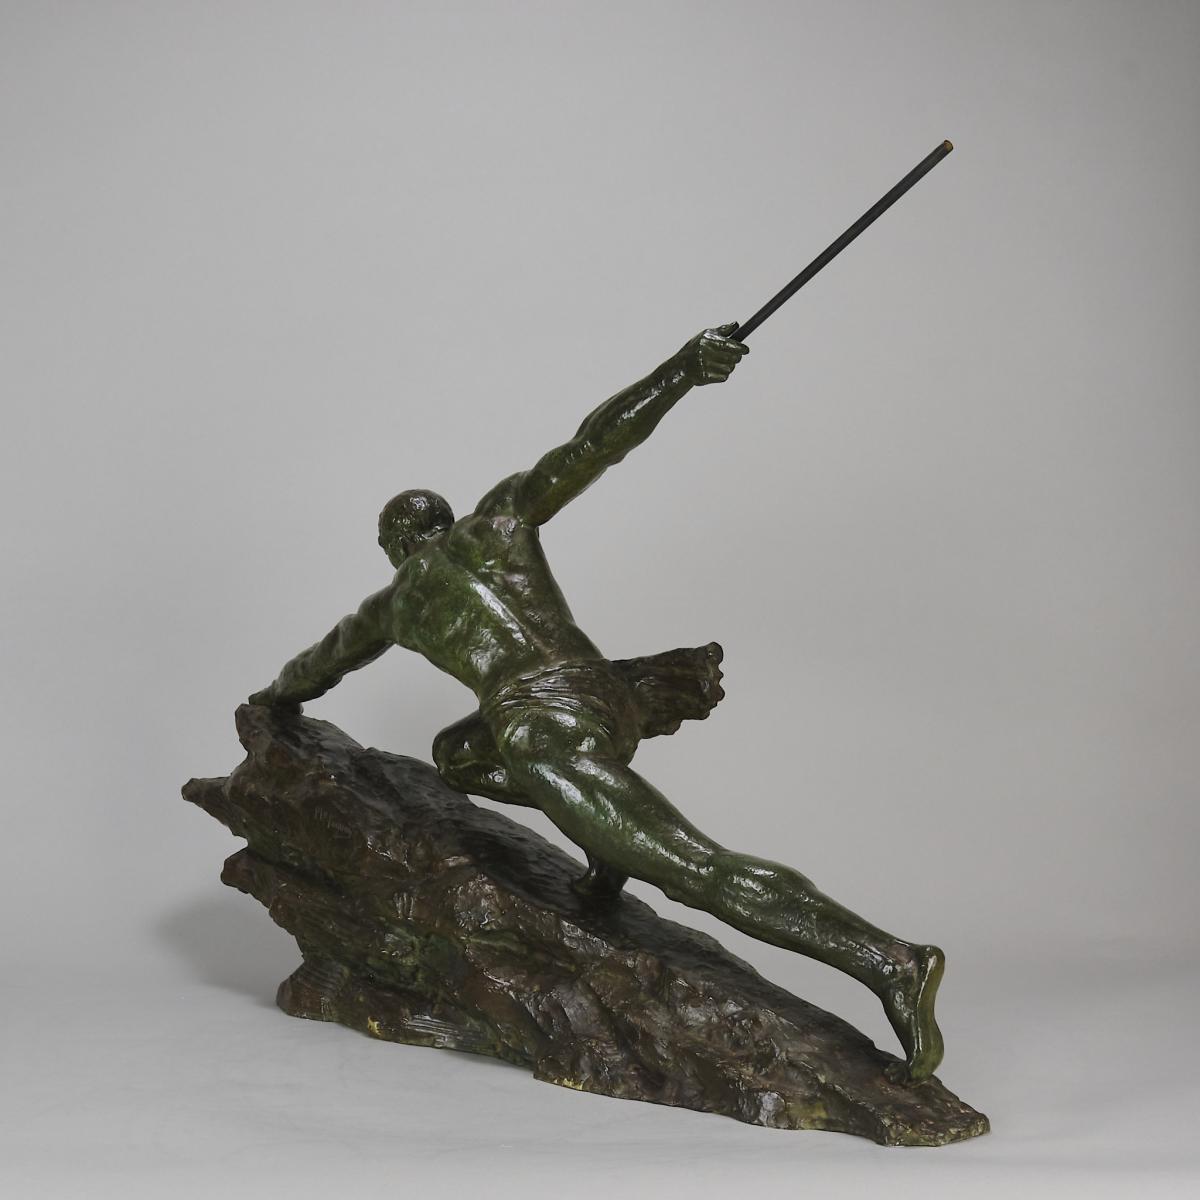 Early 20th Century Iconic Bronze Sculpture entitled "Athlete with Spear" by Pierre le Faguays